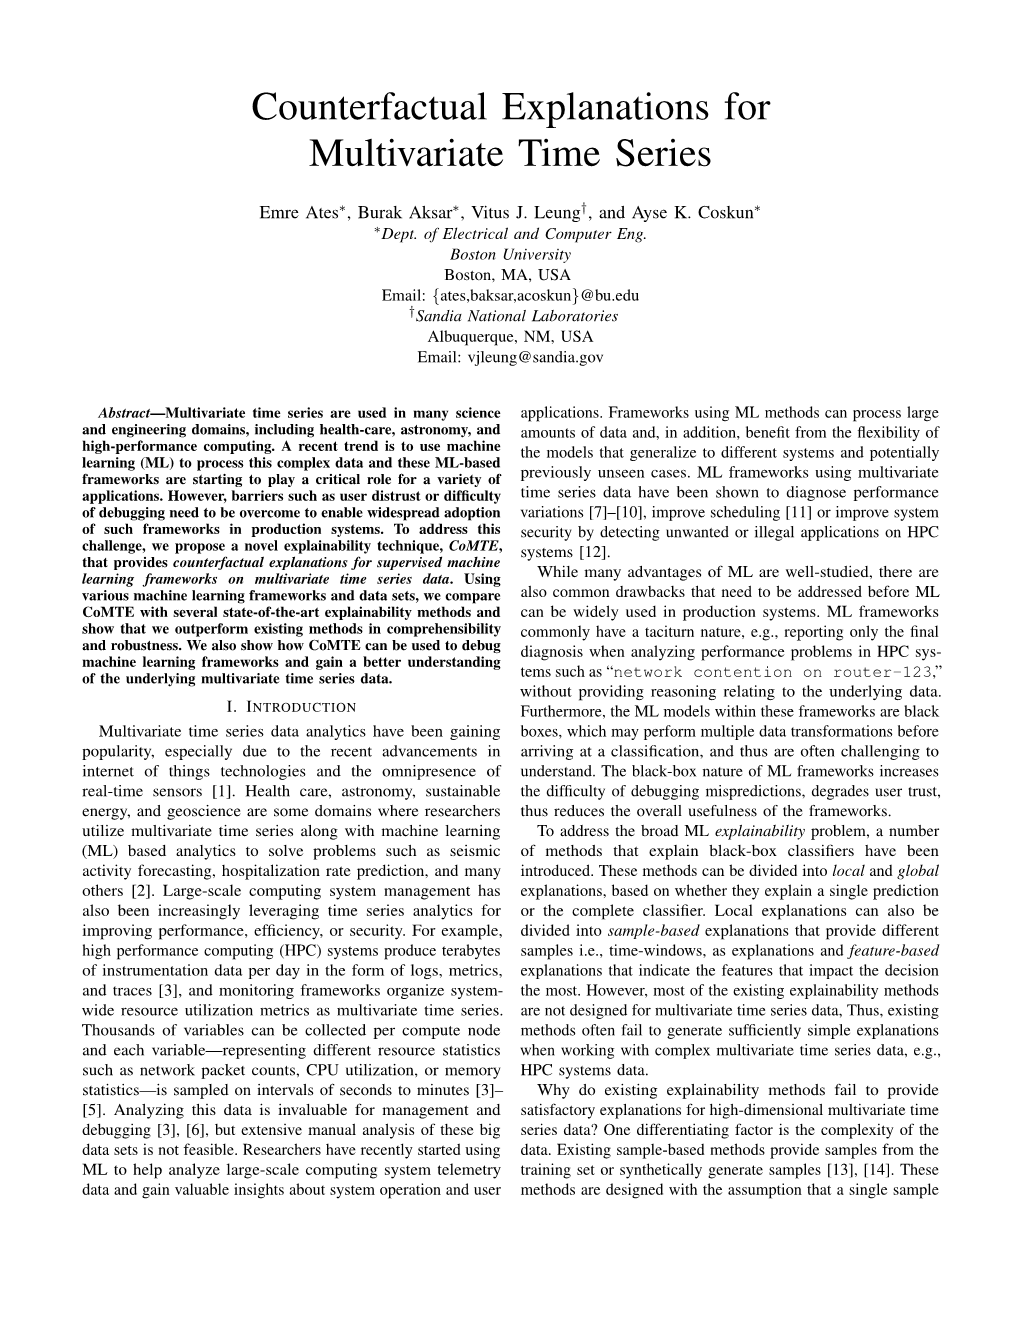 Counterfactual Explanations for Multivariate Time Series